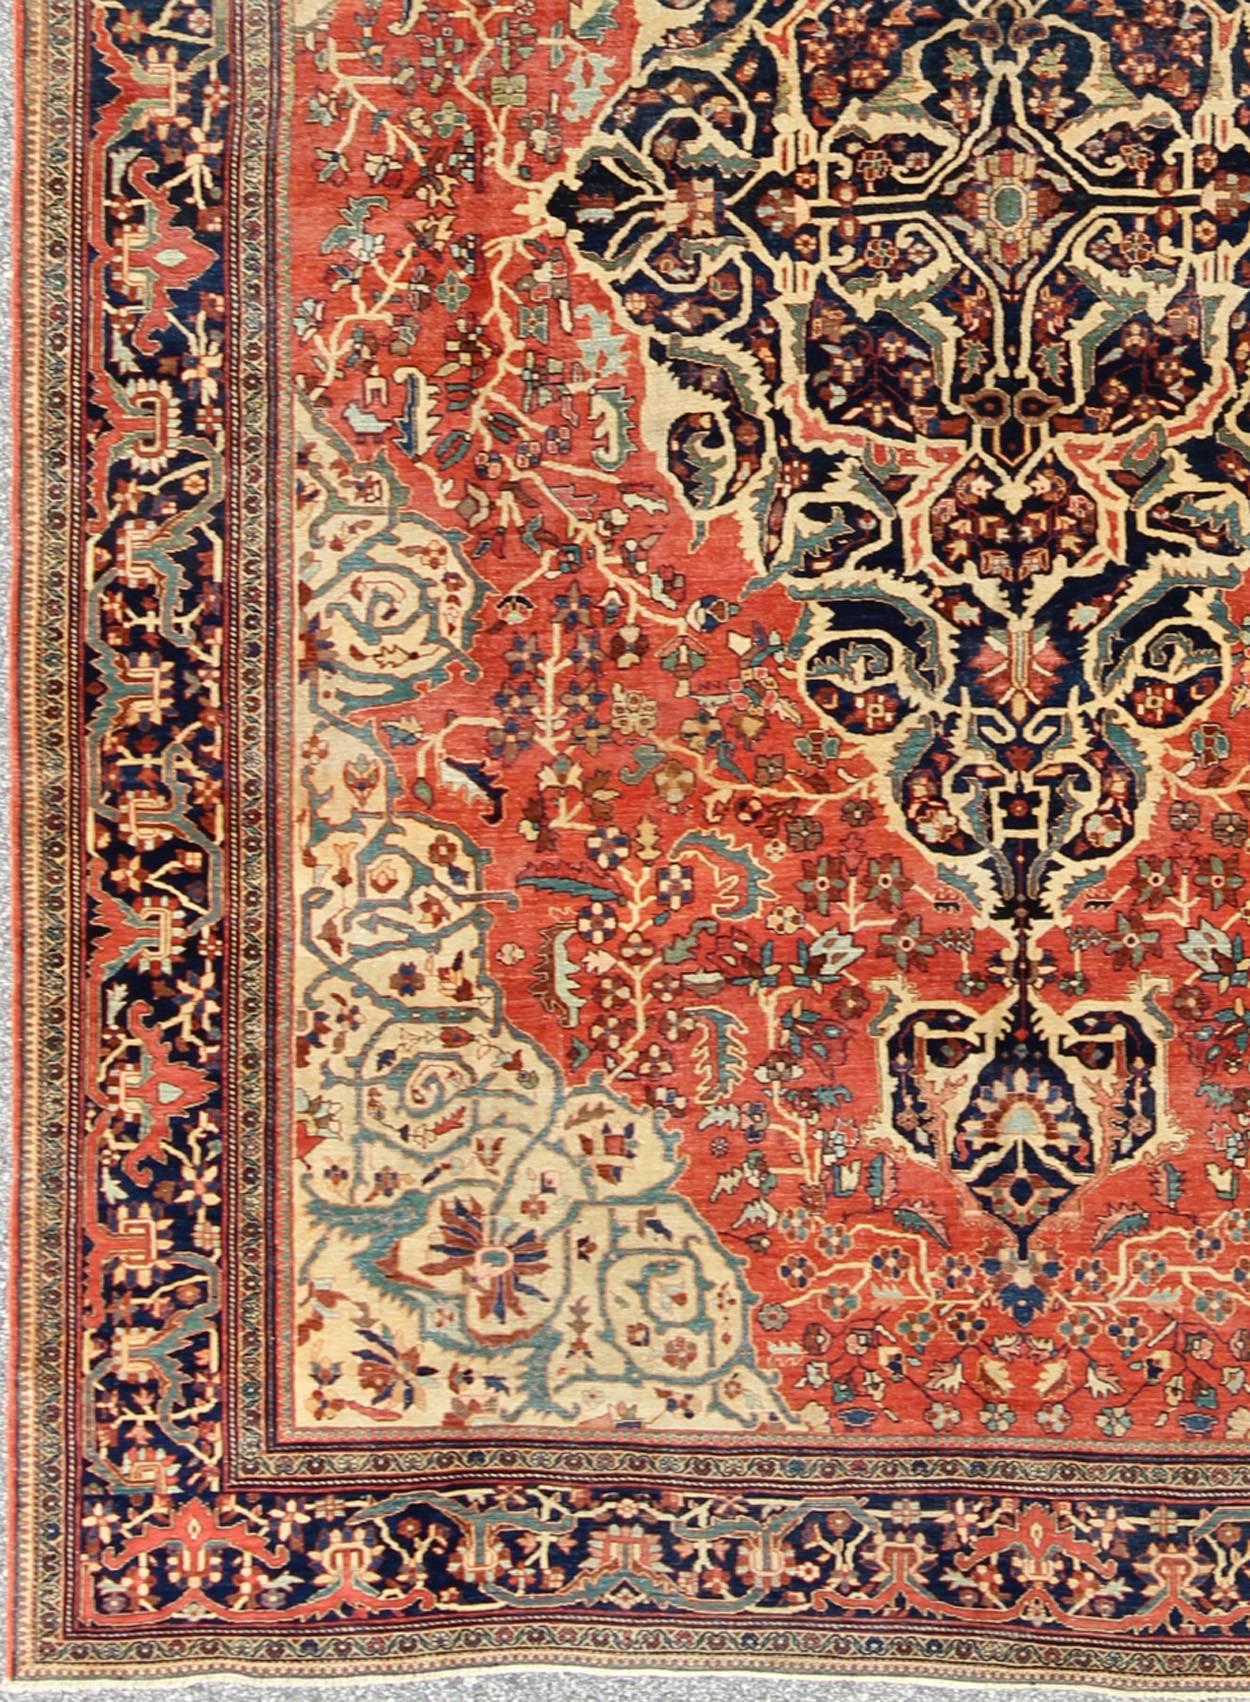 Multi-layered medallion antique Persian Sarouk-Ferahan rug in red and blue, rug m14-0402, country of origin / type: Iran / Sarouk-Ferahan, circa 1880

This fine Ferahan-Sarouk carpet form the late 19th century boasts an impressive multi-layered